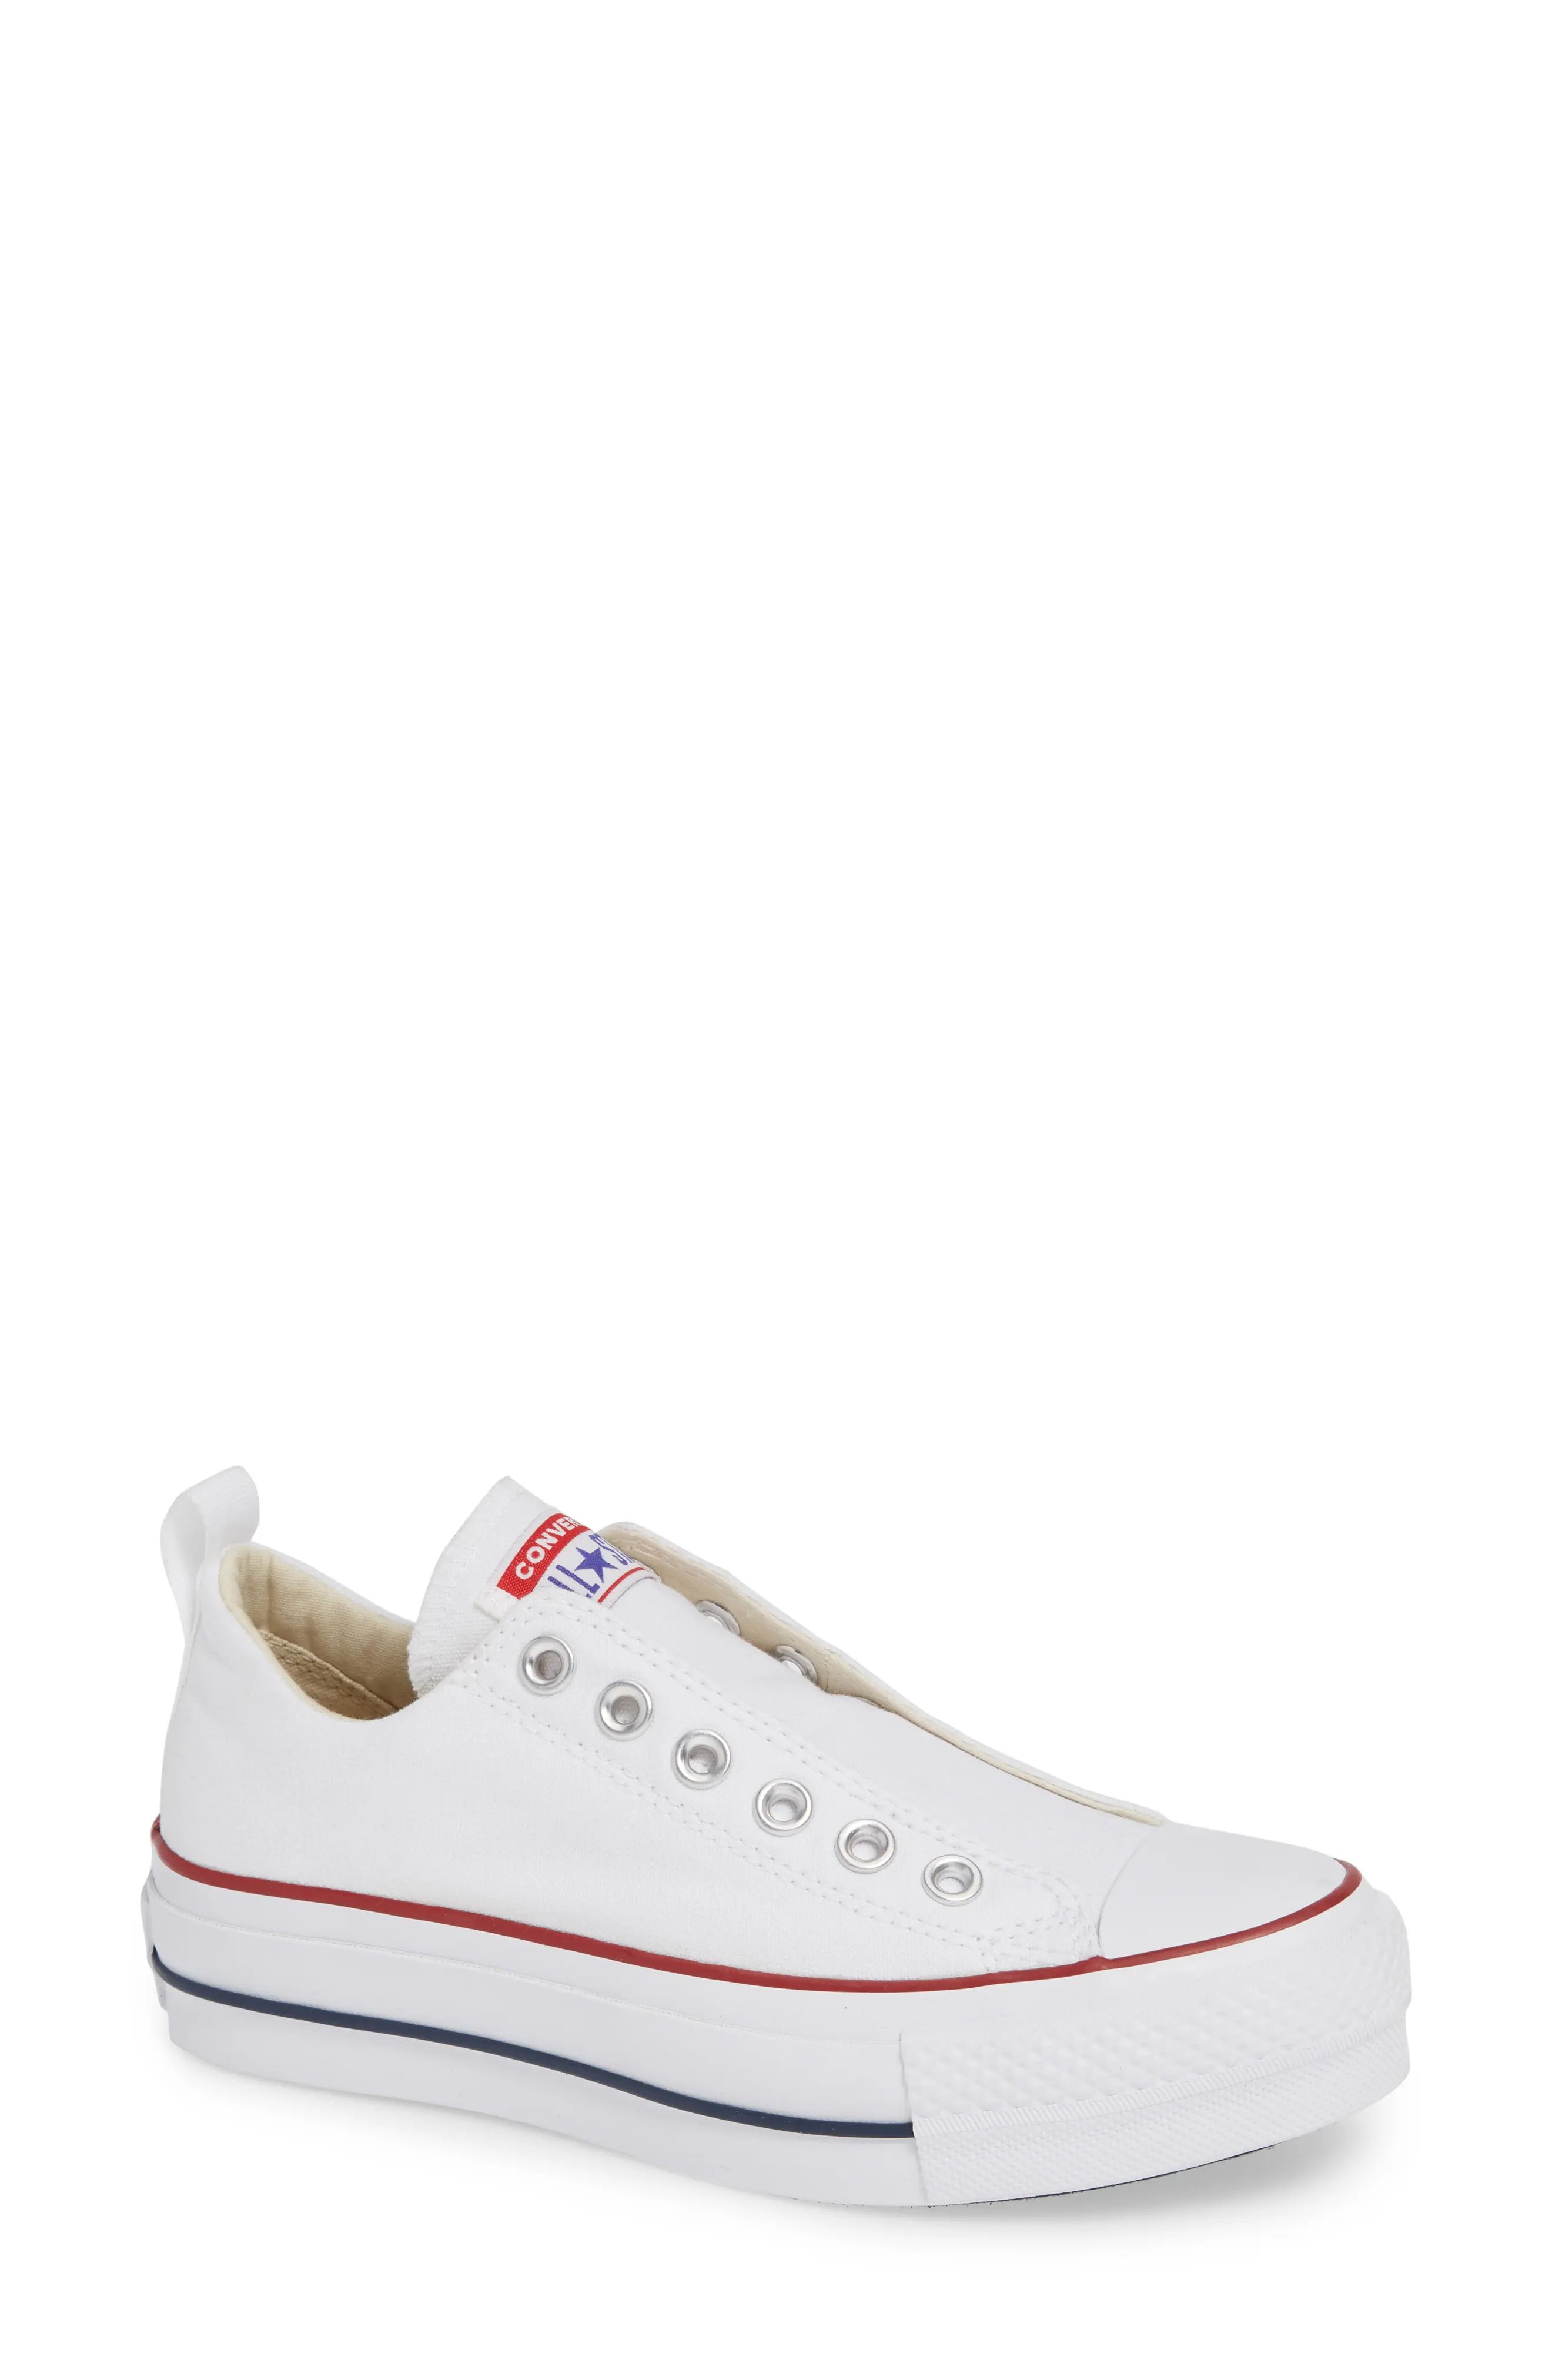 Women's Converse Chuck Taylor All Star Low Top Sneaker, Size 5 M - White | Nordstrom